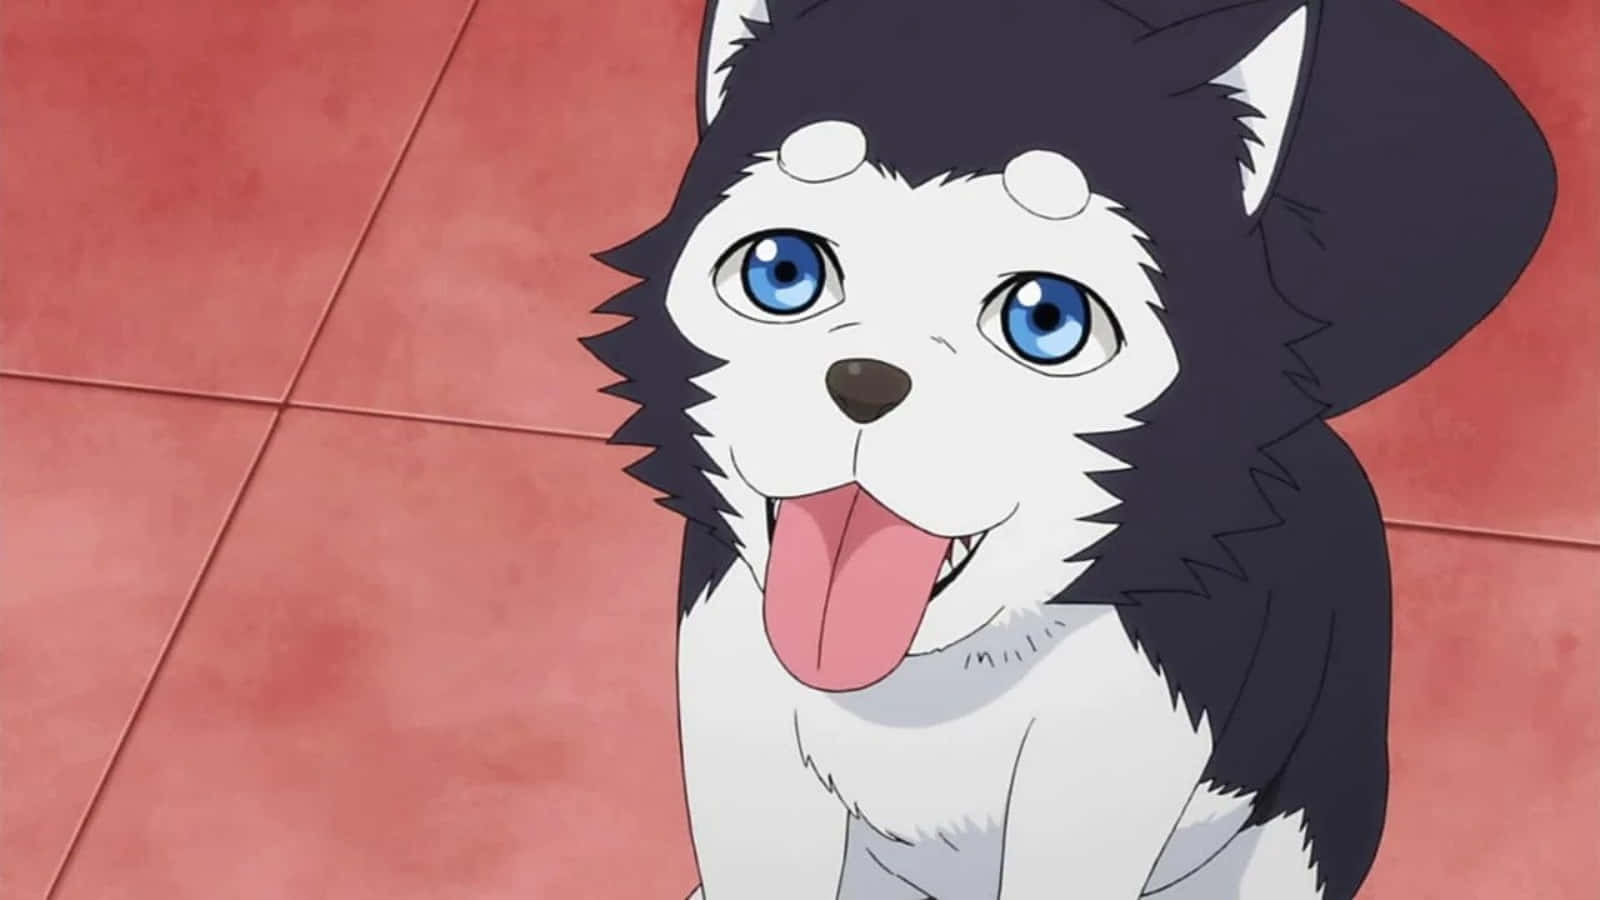 Loyal and protective, the anime dog is a symbol of unwavering devotion.